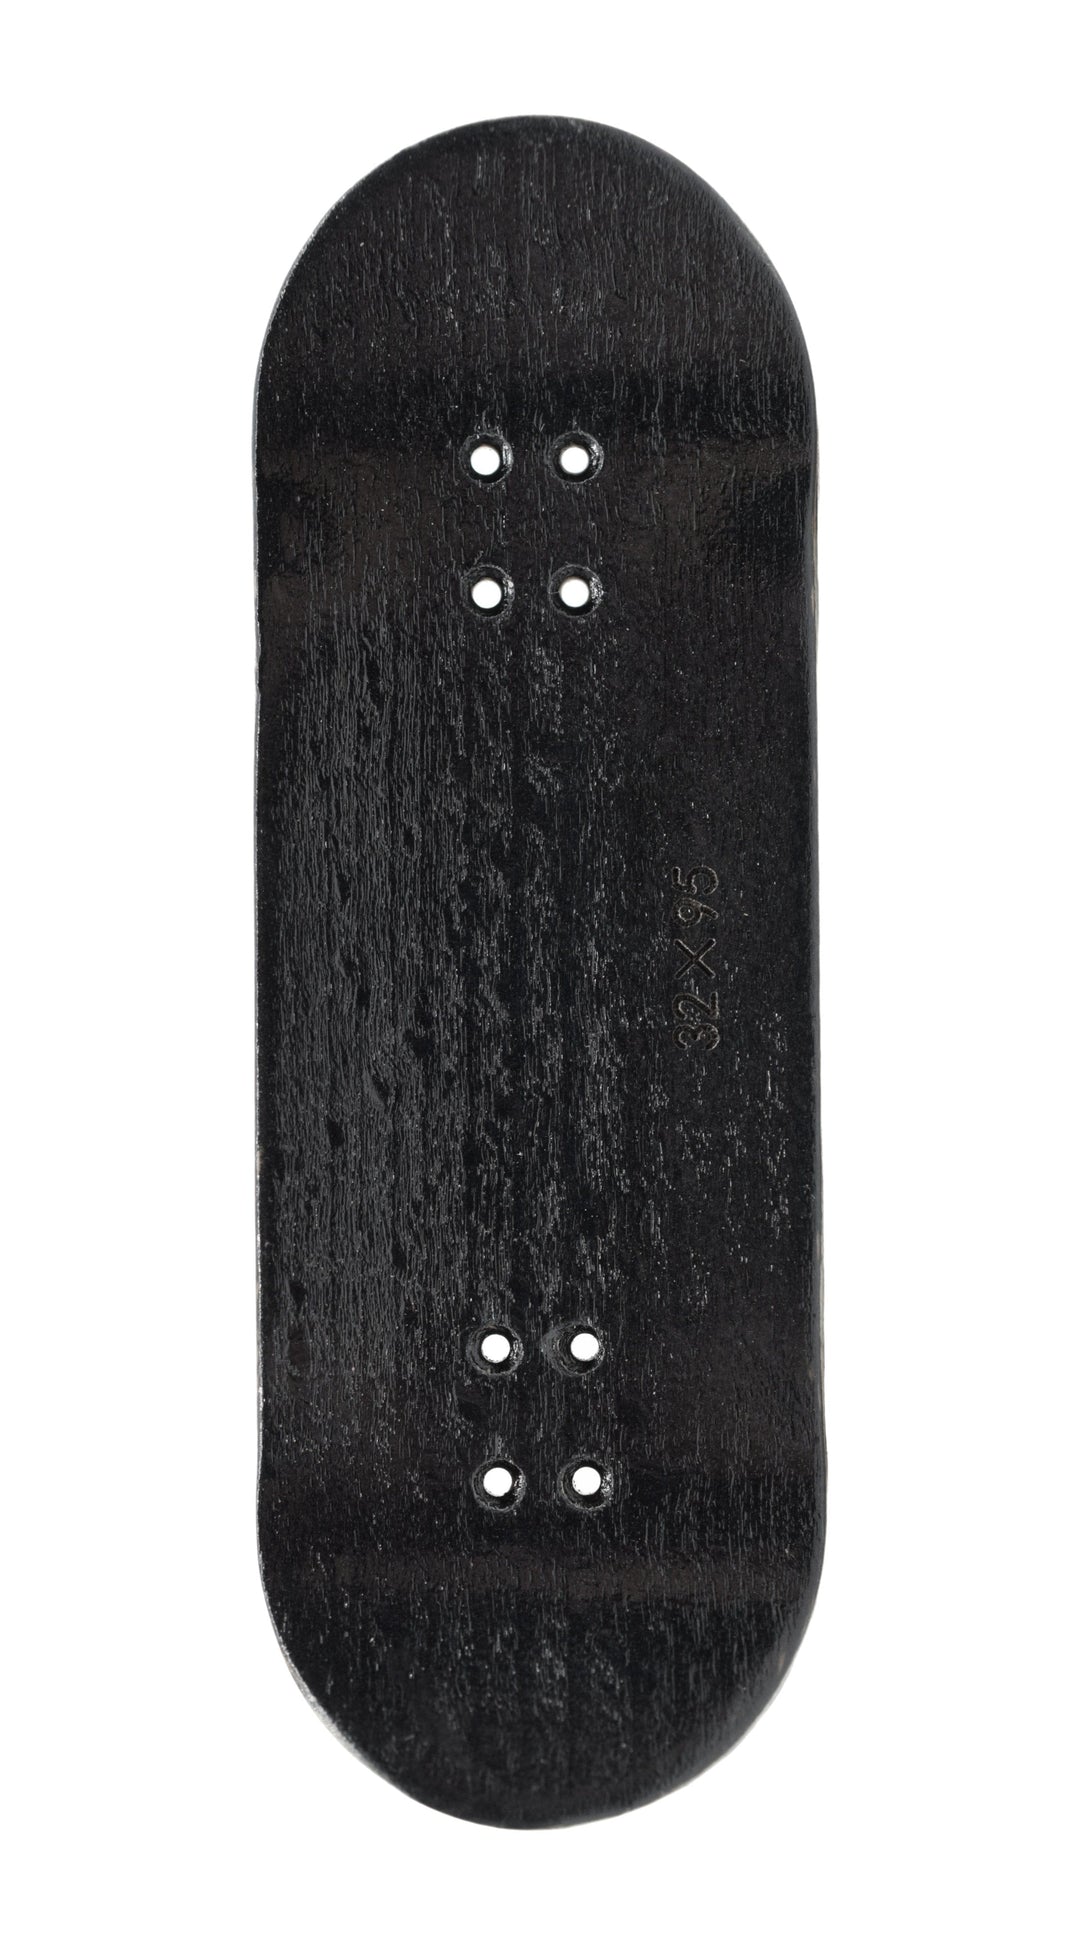 Teak Tuning PROlific Wooden 5 Ply Fingerboard Deck 32x95mm - Black Mamba - with Color Matching Mid Ply